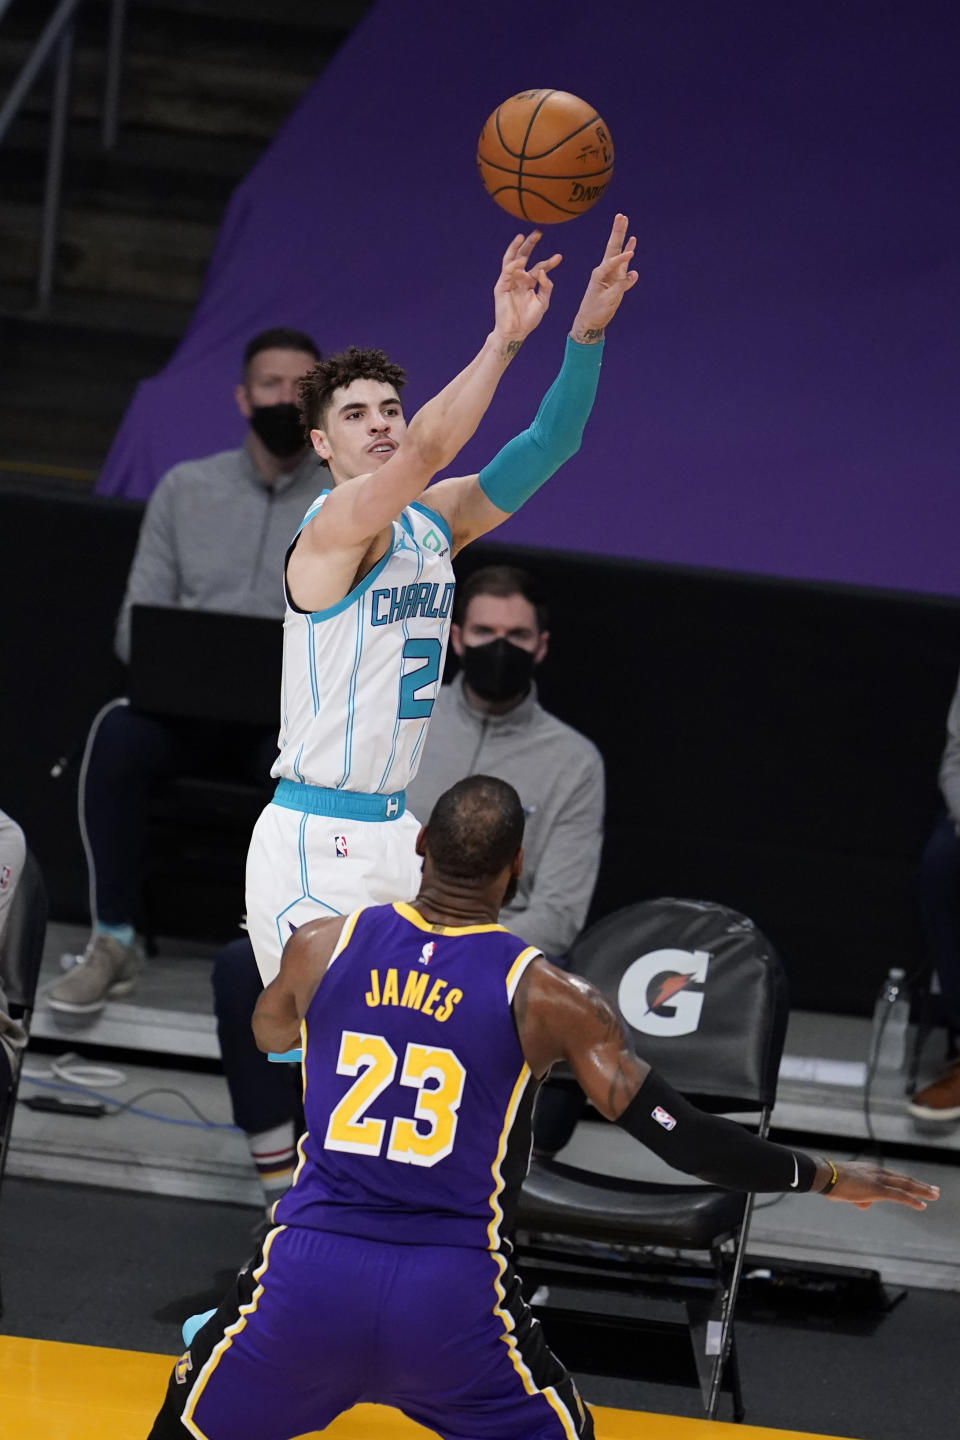 Charlotte Hornets guard LaMelo Ball shoots over Los Angeles Lakers forward LeBron James (23) during the first half of an NBA basketball game Thursday, March 18, 2021, in Los Angeles. (AP Photo/Marcio Jose Sanchez)